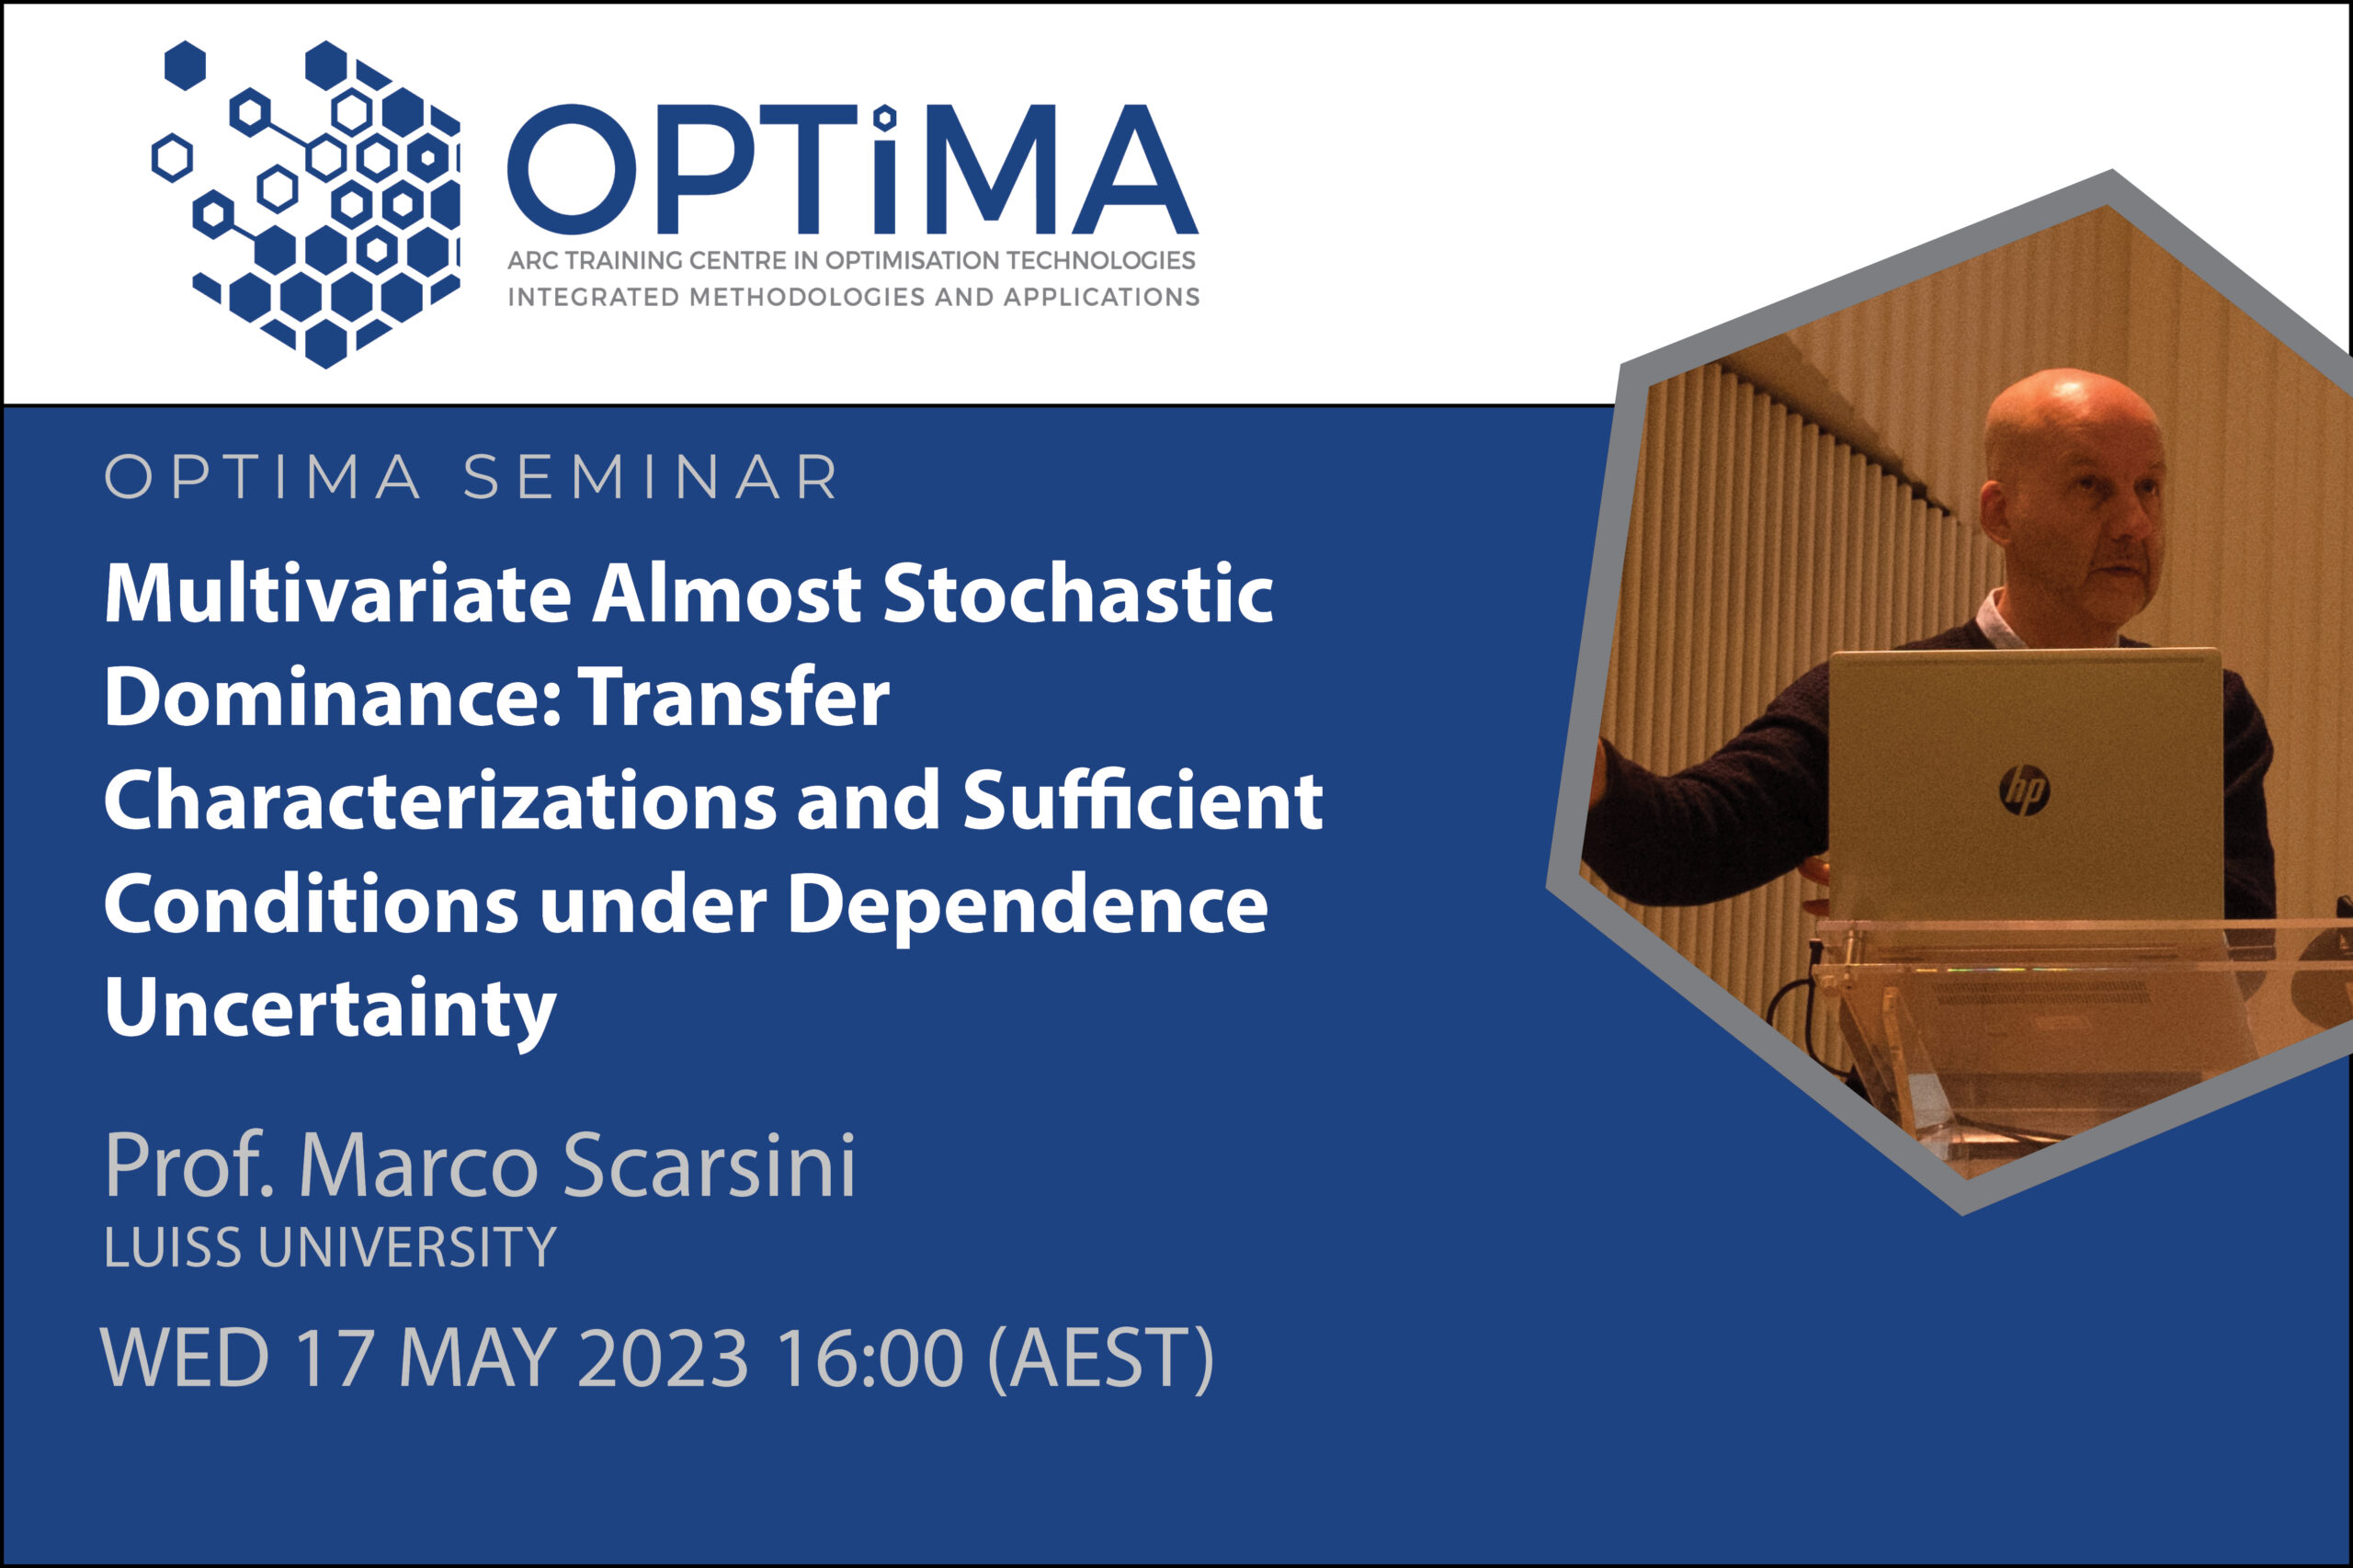 Banner for advertising an OPTIMA seminar being held on 17th May (4-5pm AEST), 2023, presented by Marco Scarsini. It is titled: "Multivariate Almost Stochastic Dominance: Transfer Characterizations and Sufficient Conditions under Dependence Uncertainty ".